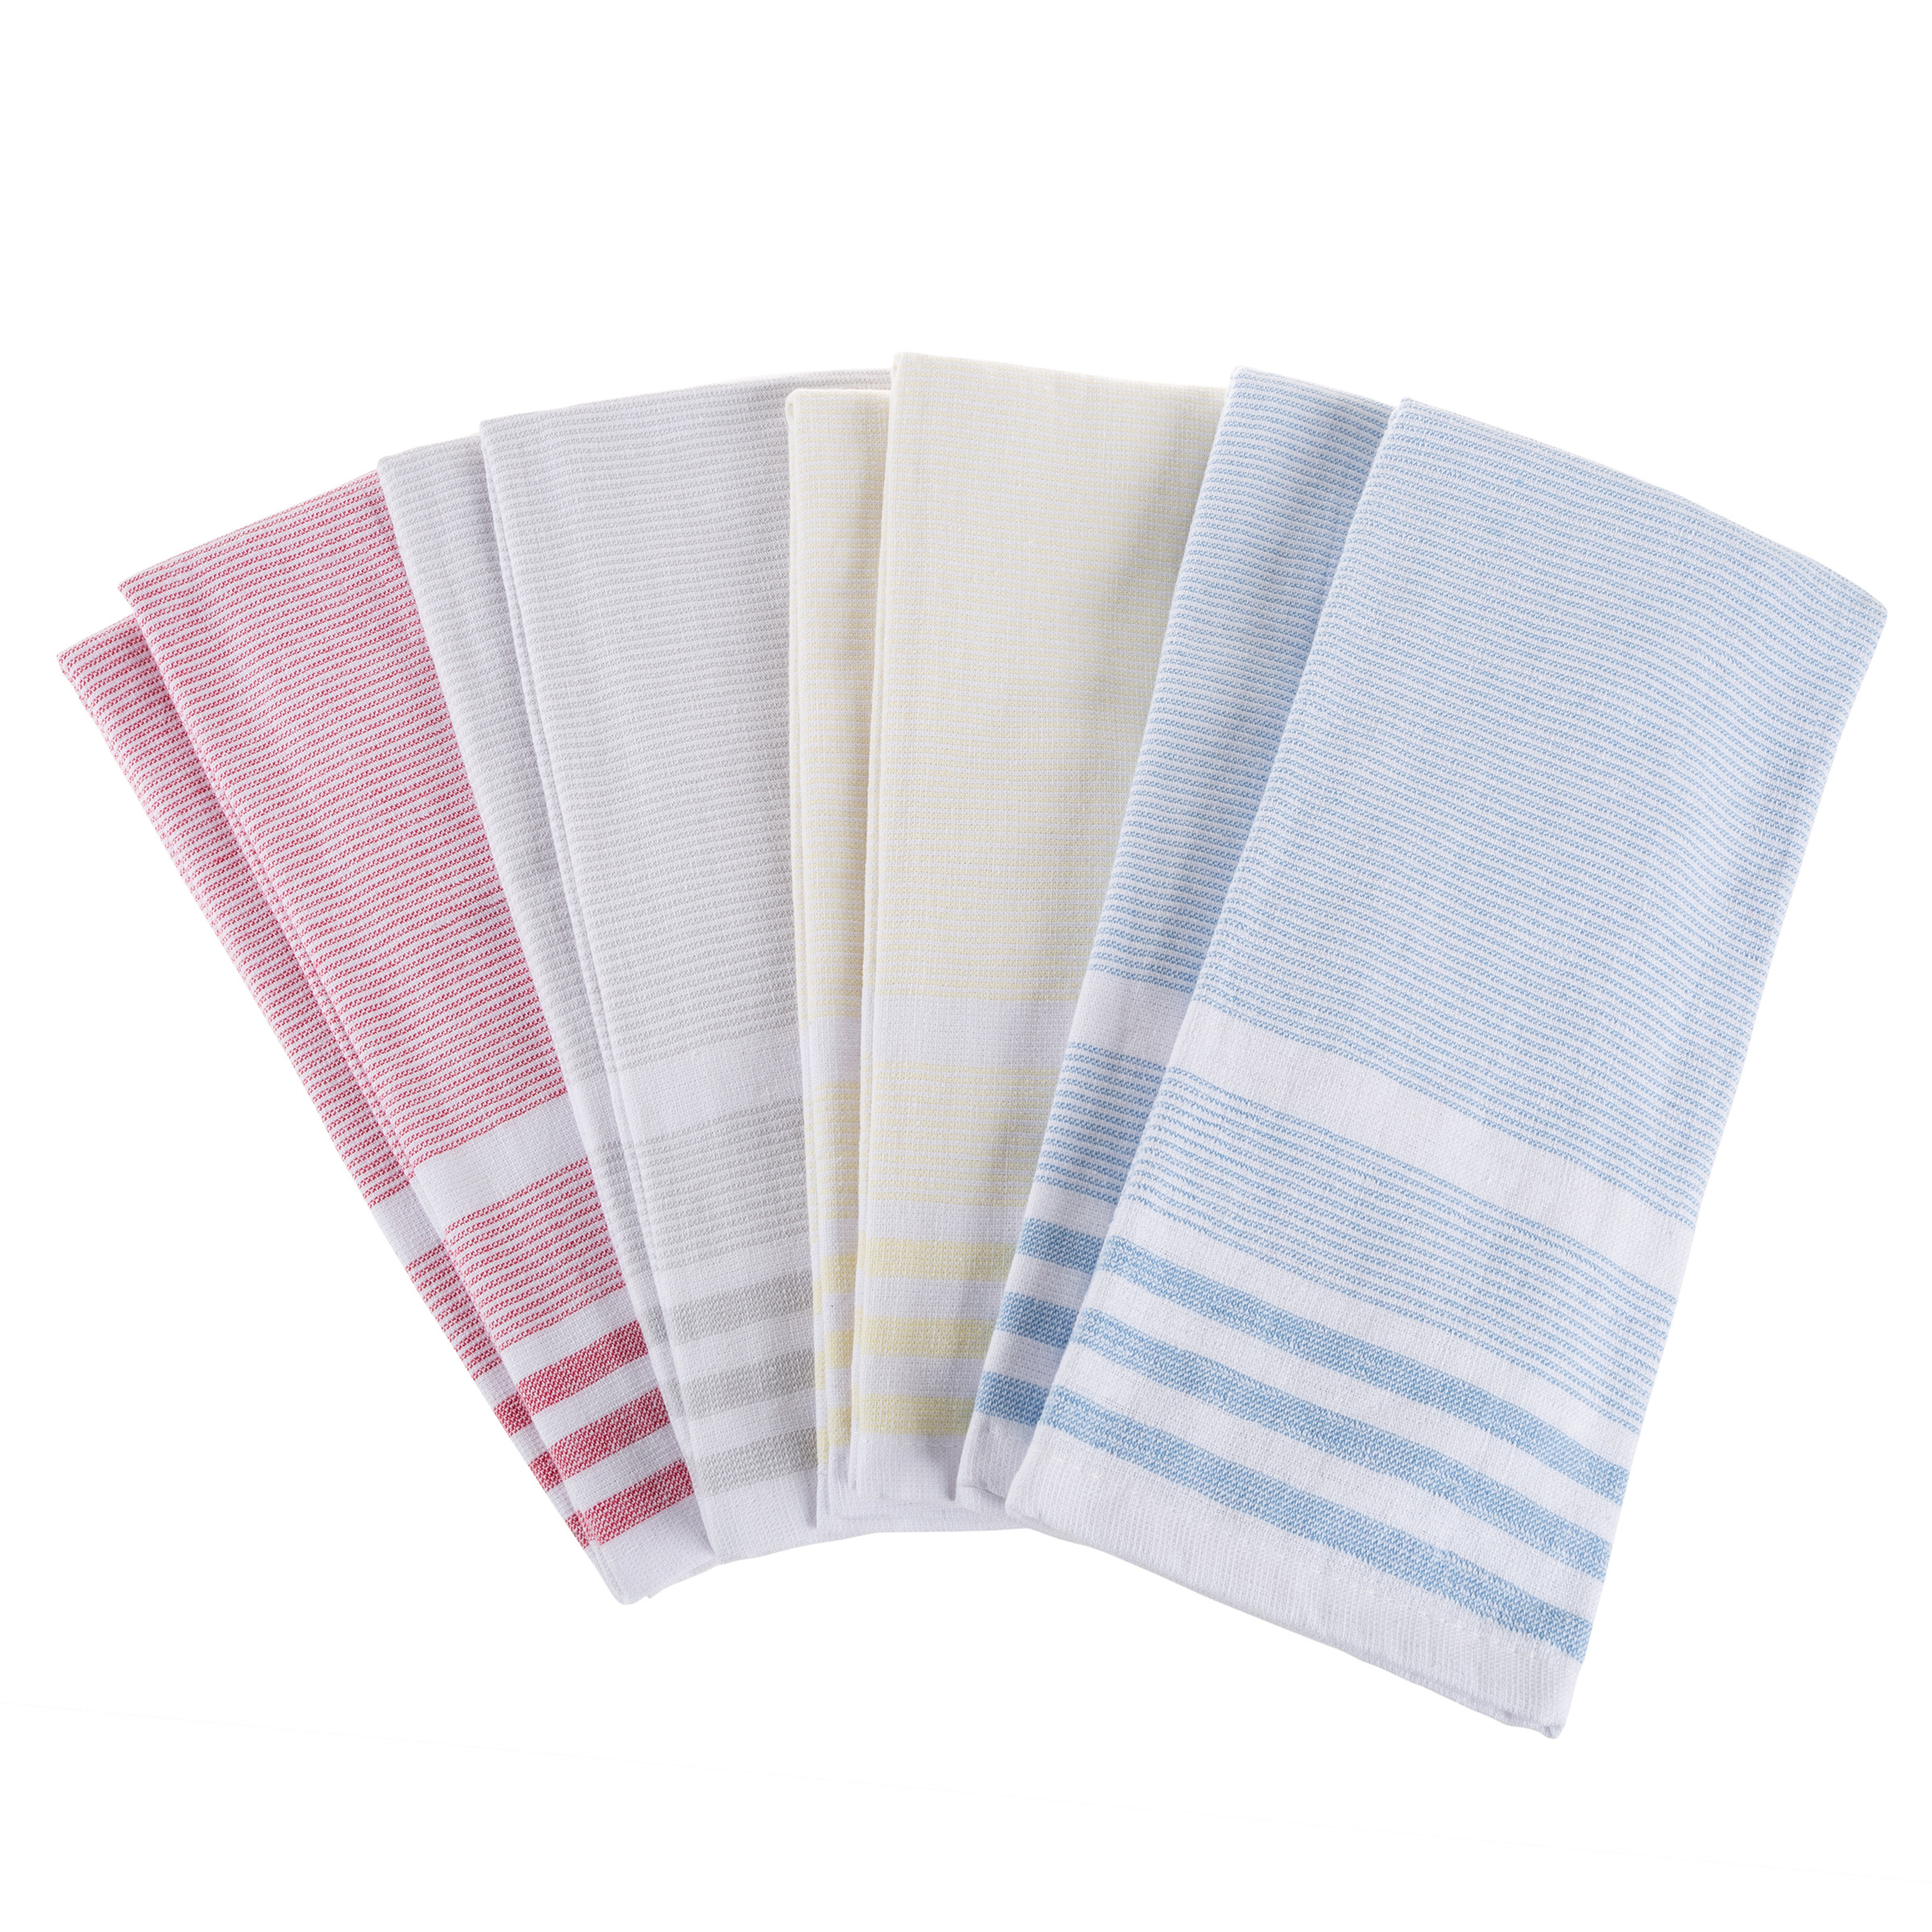 100% Cotton 16 Dish Cloth Or 8 Hand Towel Set Home Decor Matching Kitchen Linens - 16 Pack Dishcloth